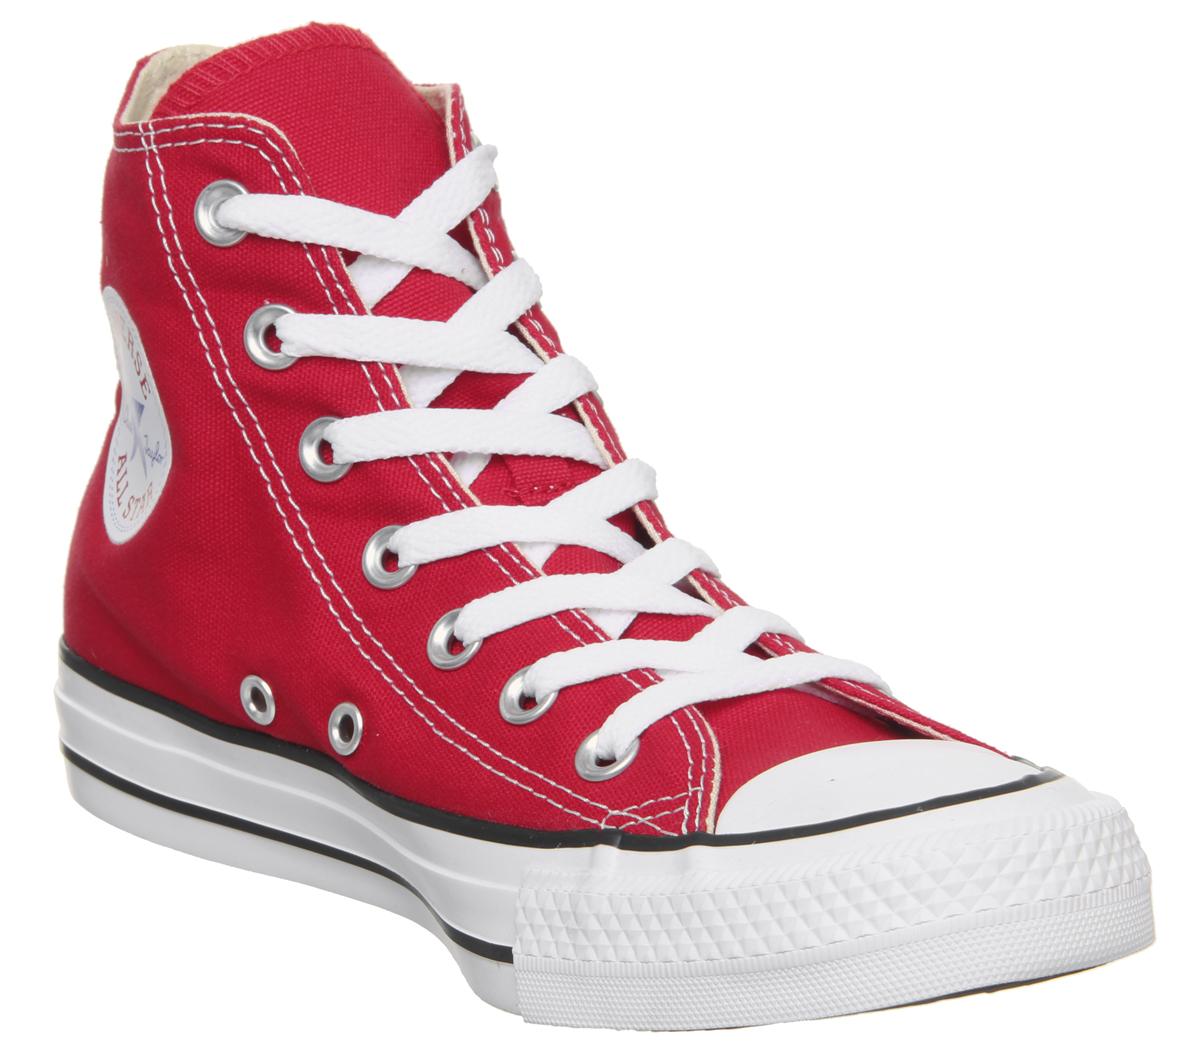 red converse womens size 6